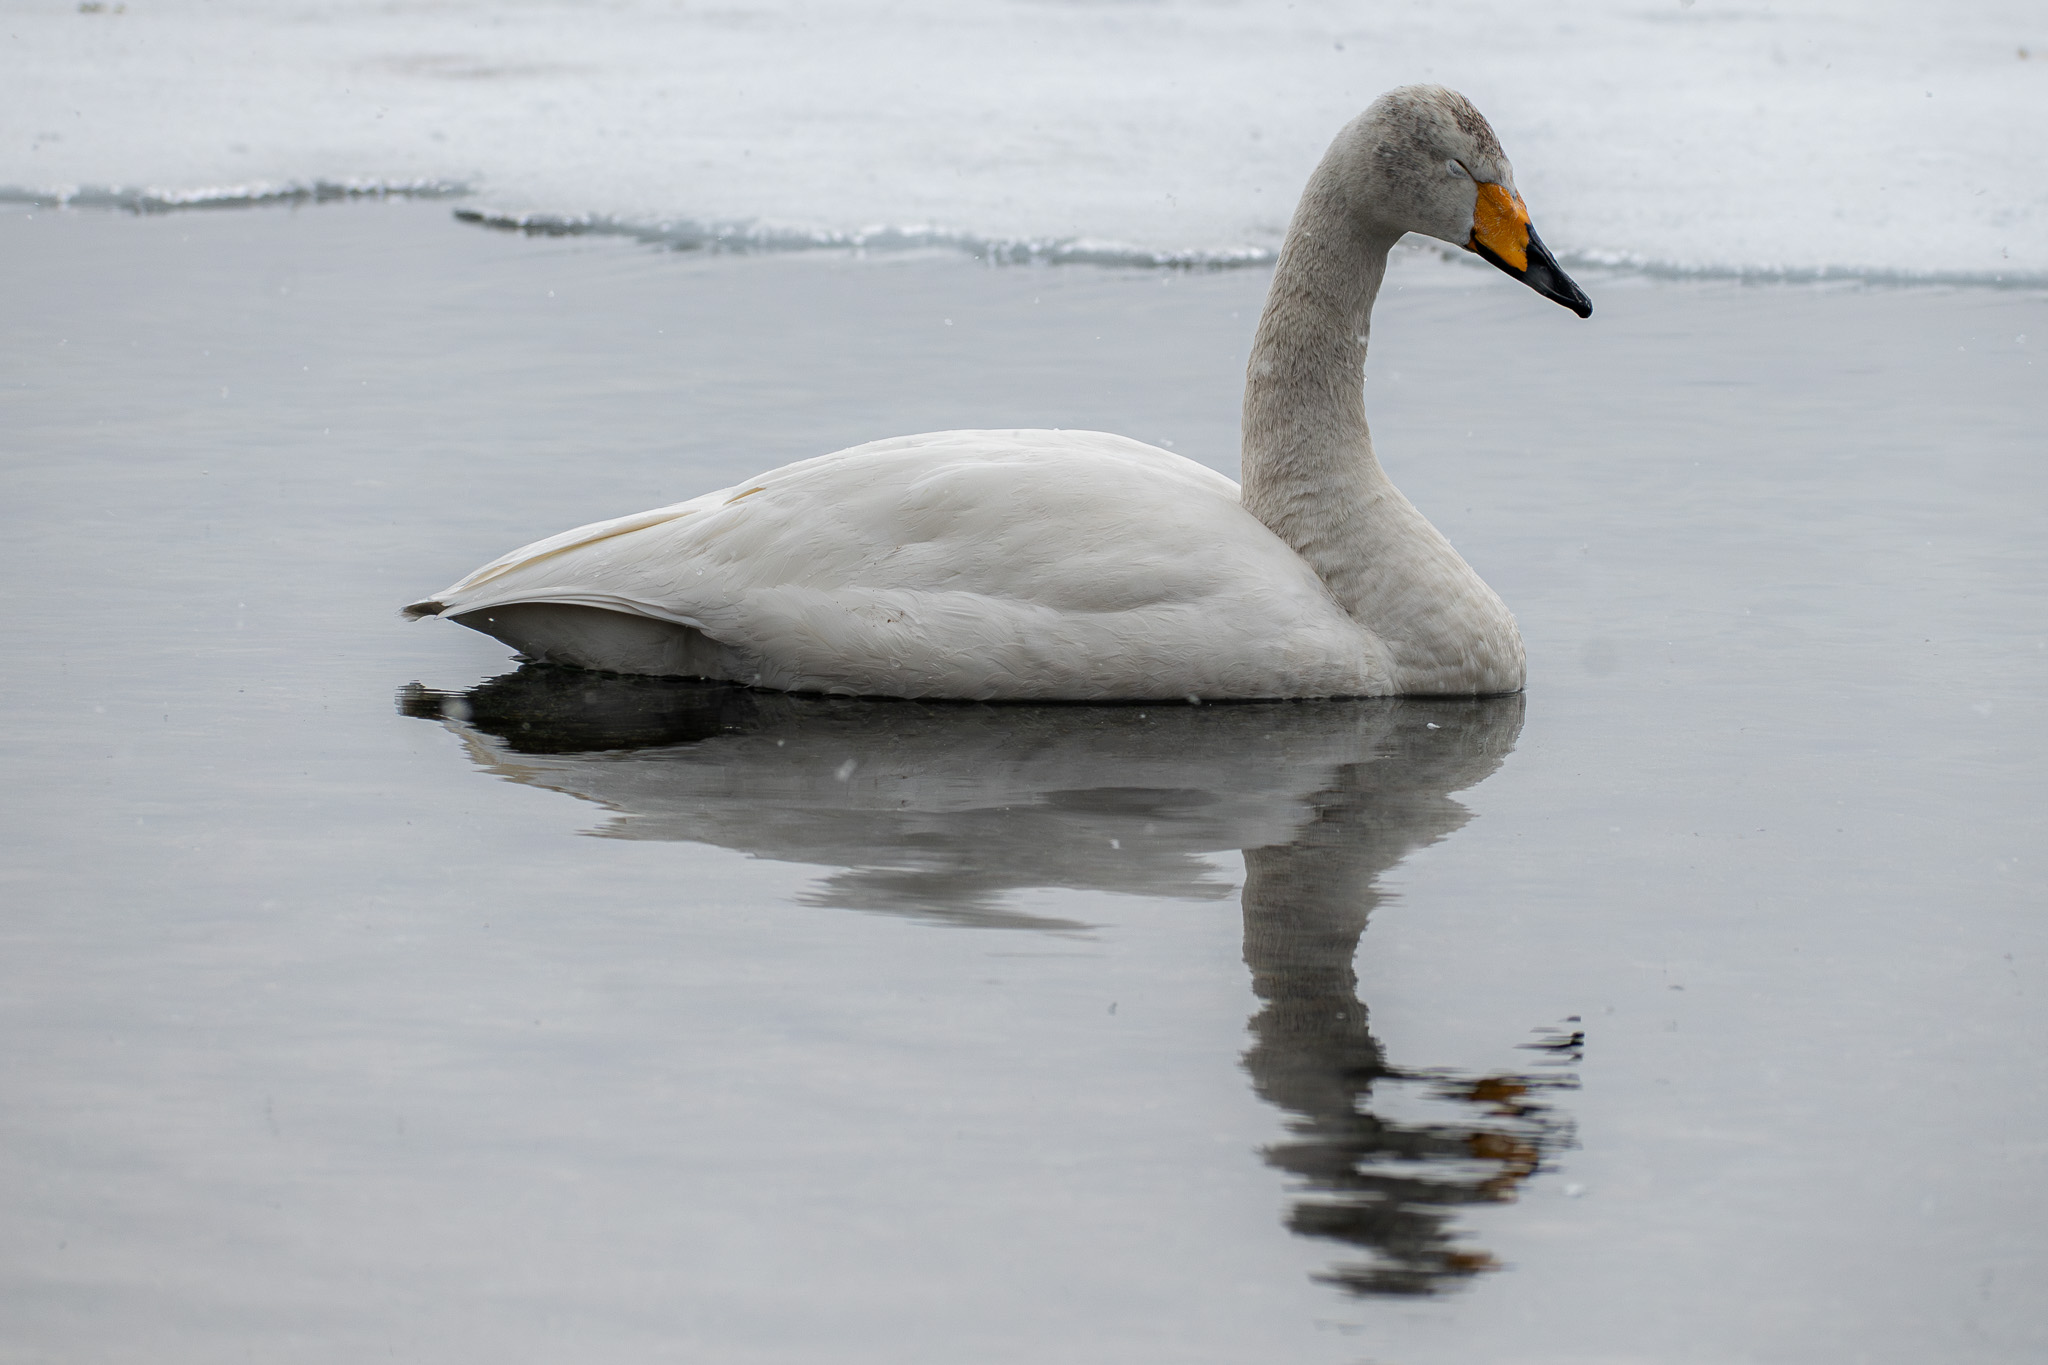 A Whooper Swan sits on Lake Kussharo, reflected in the water's surface. It is snowing and the swan is sleepy, closing its eyes.